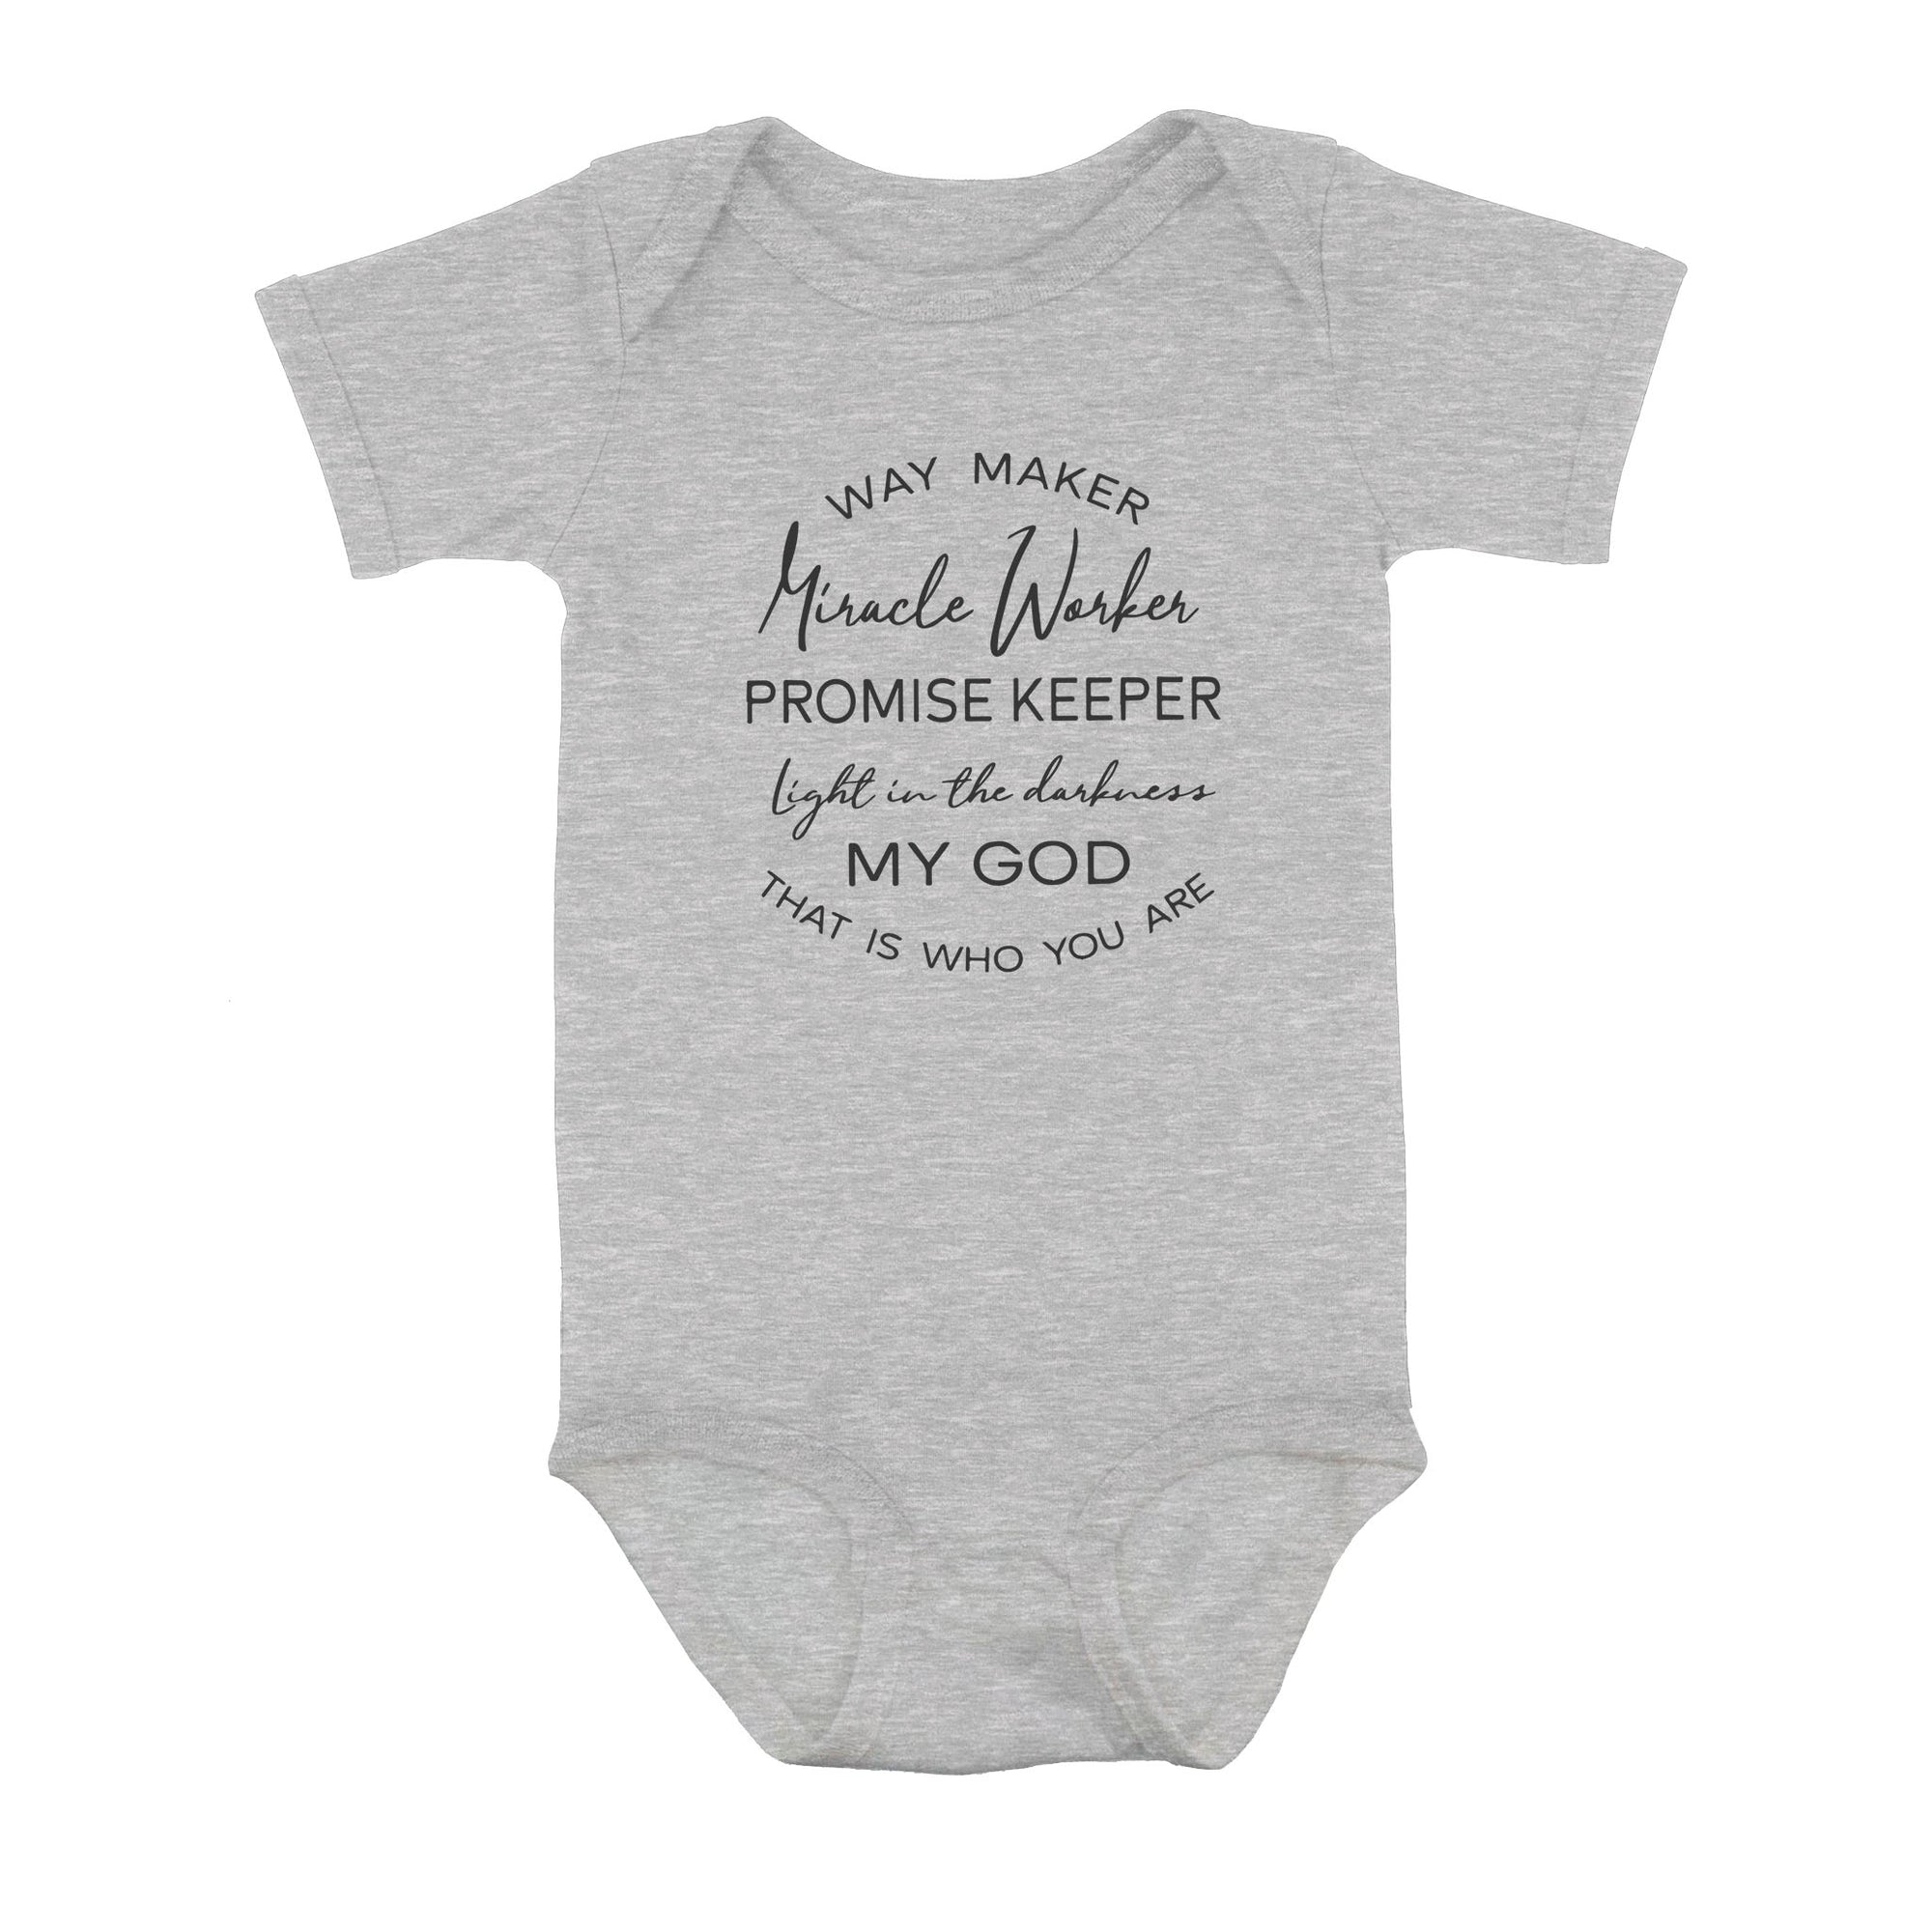 Way Maker Miracle Worker Promise Keeper Light In The Darkness My God That Is Who You Are - Baby Onesie